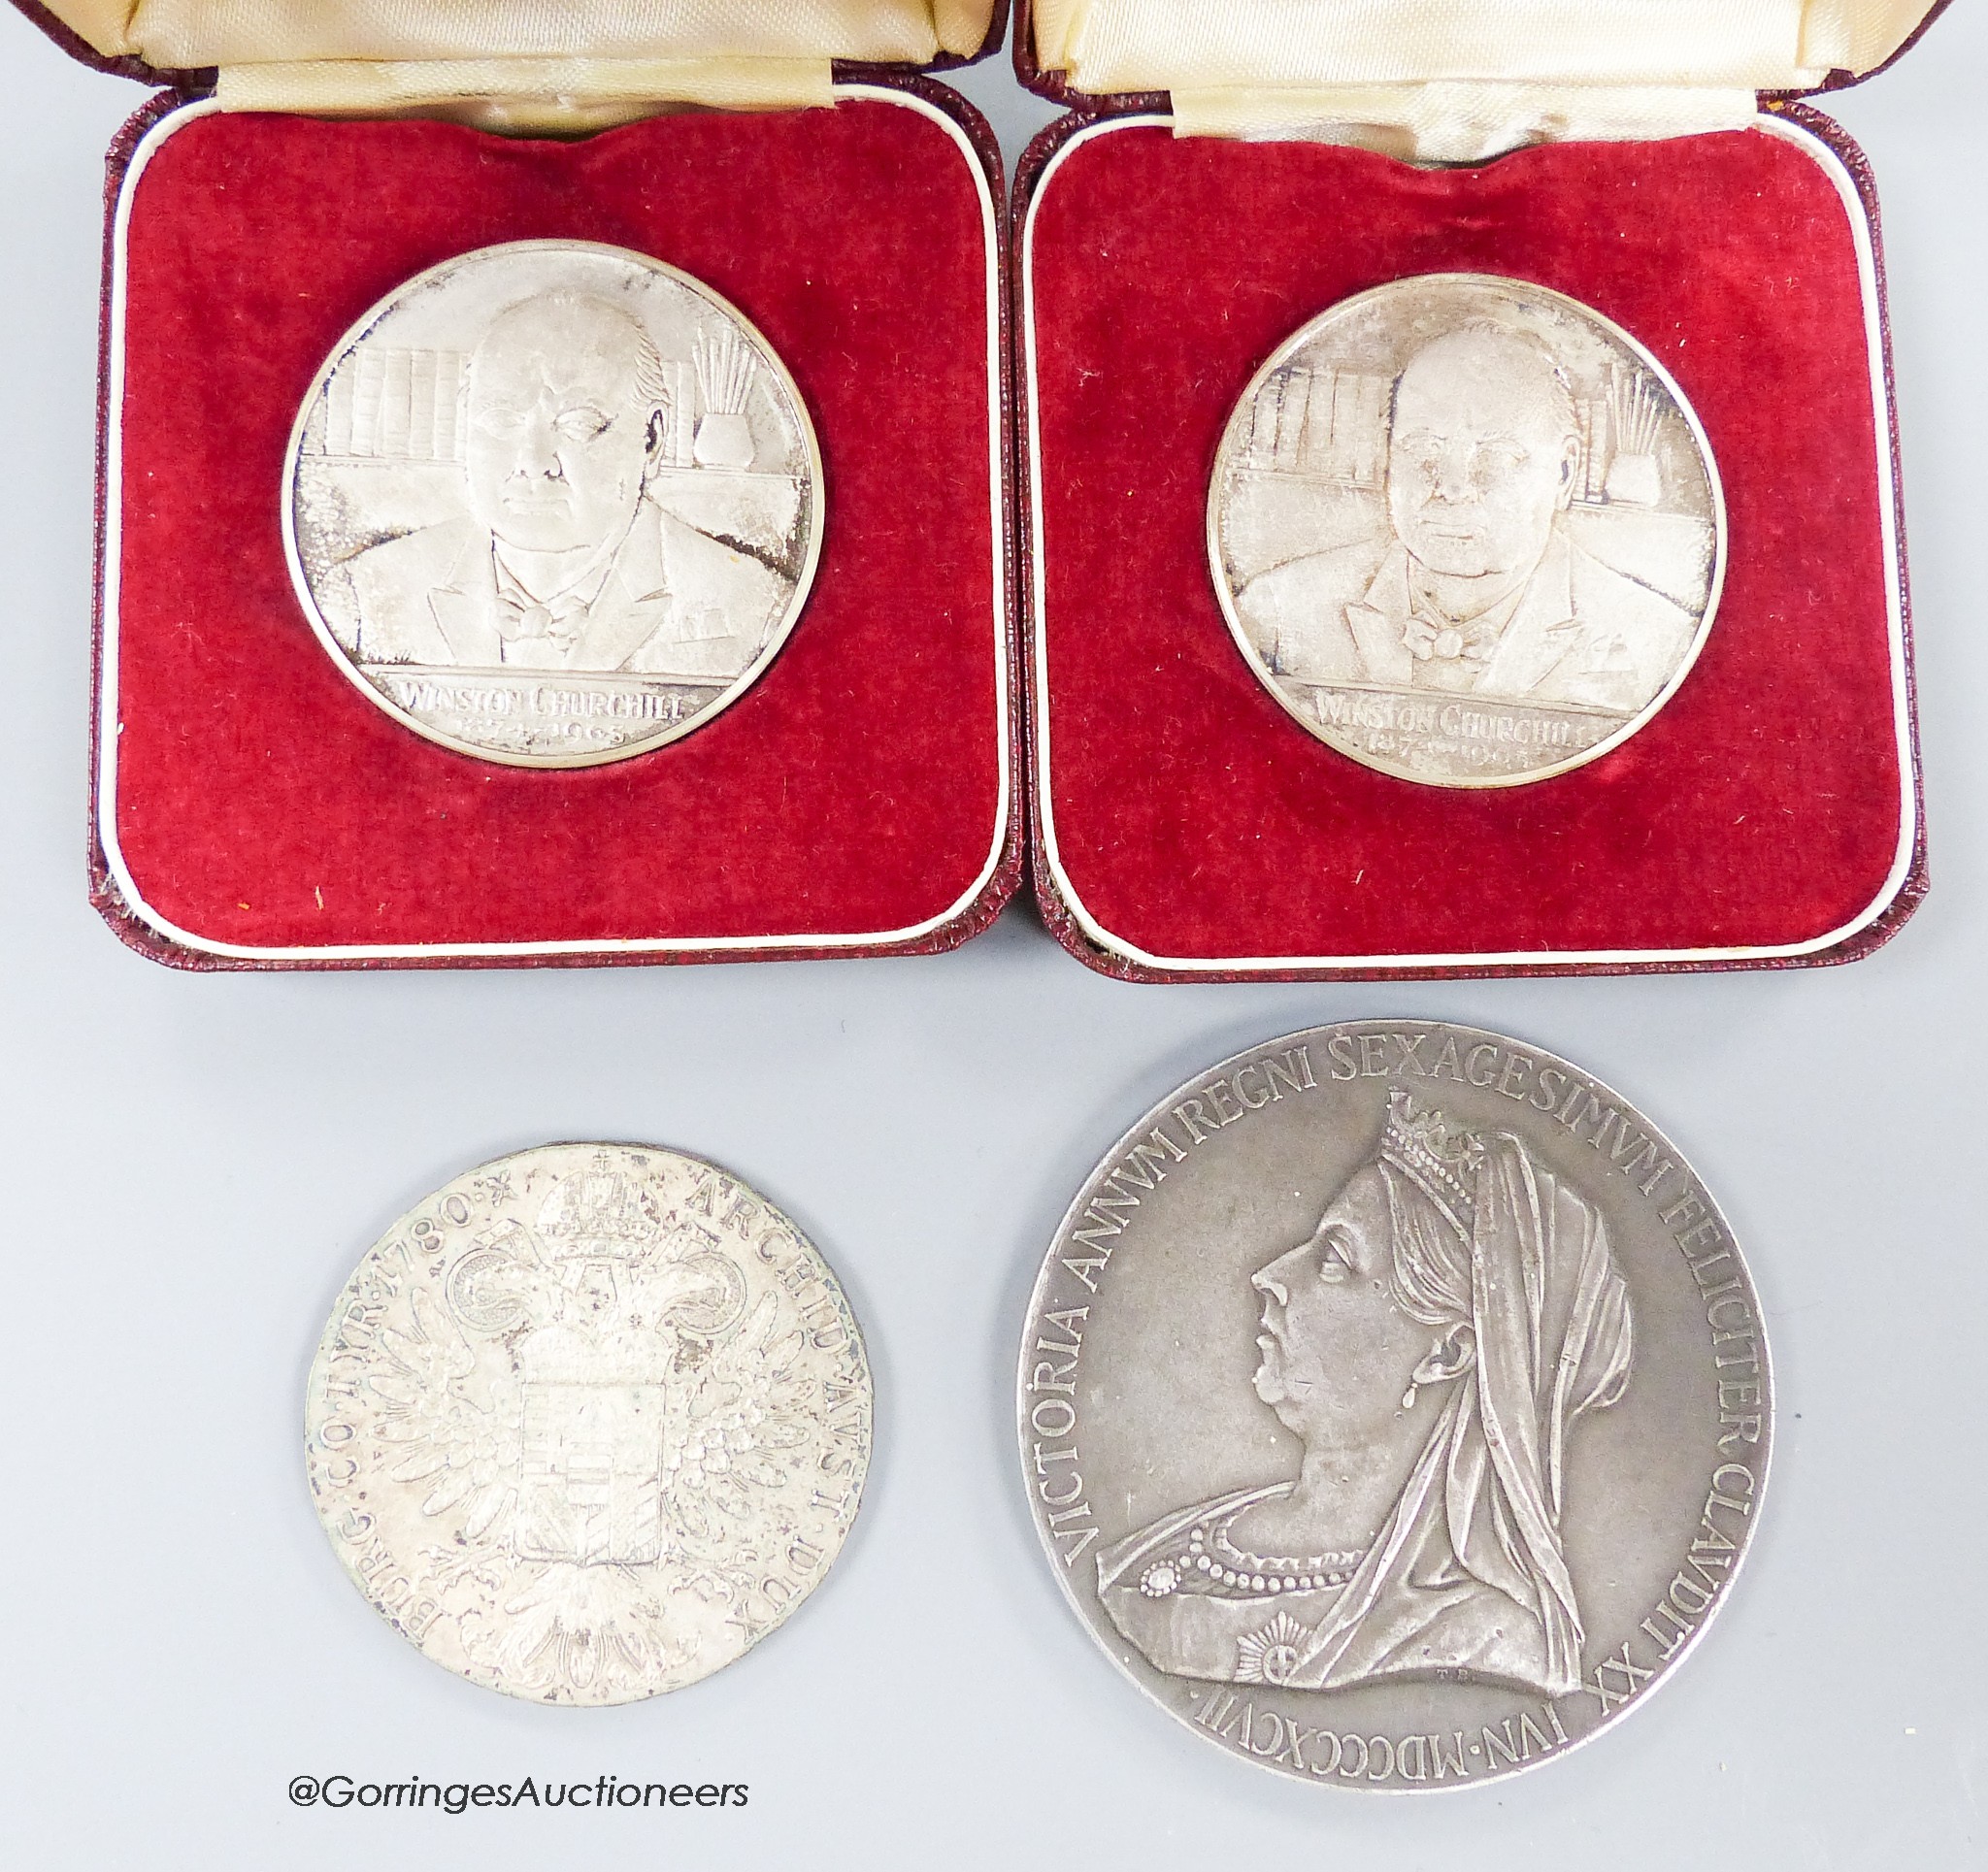 Two Churchill crowns and two silver medals